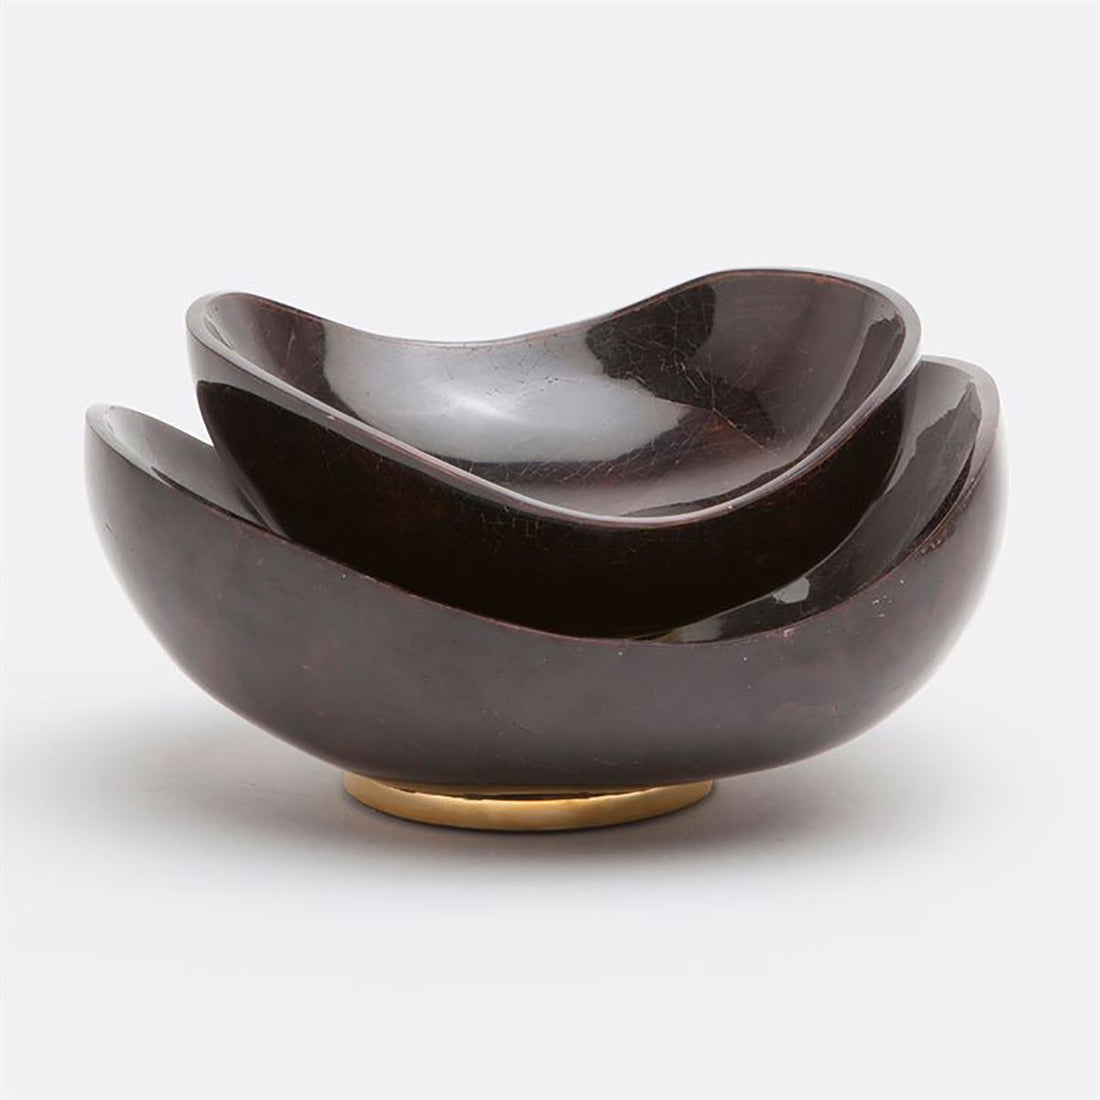 Made Goods Tarian Shell with Gold Base Bowl, 2-Piece Set